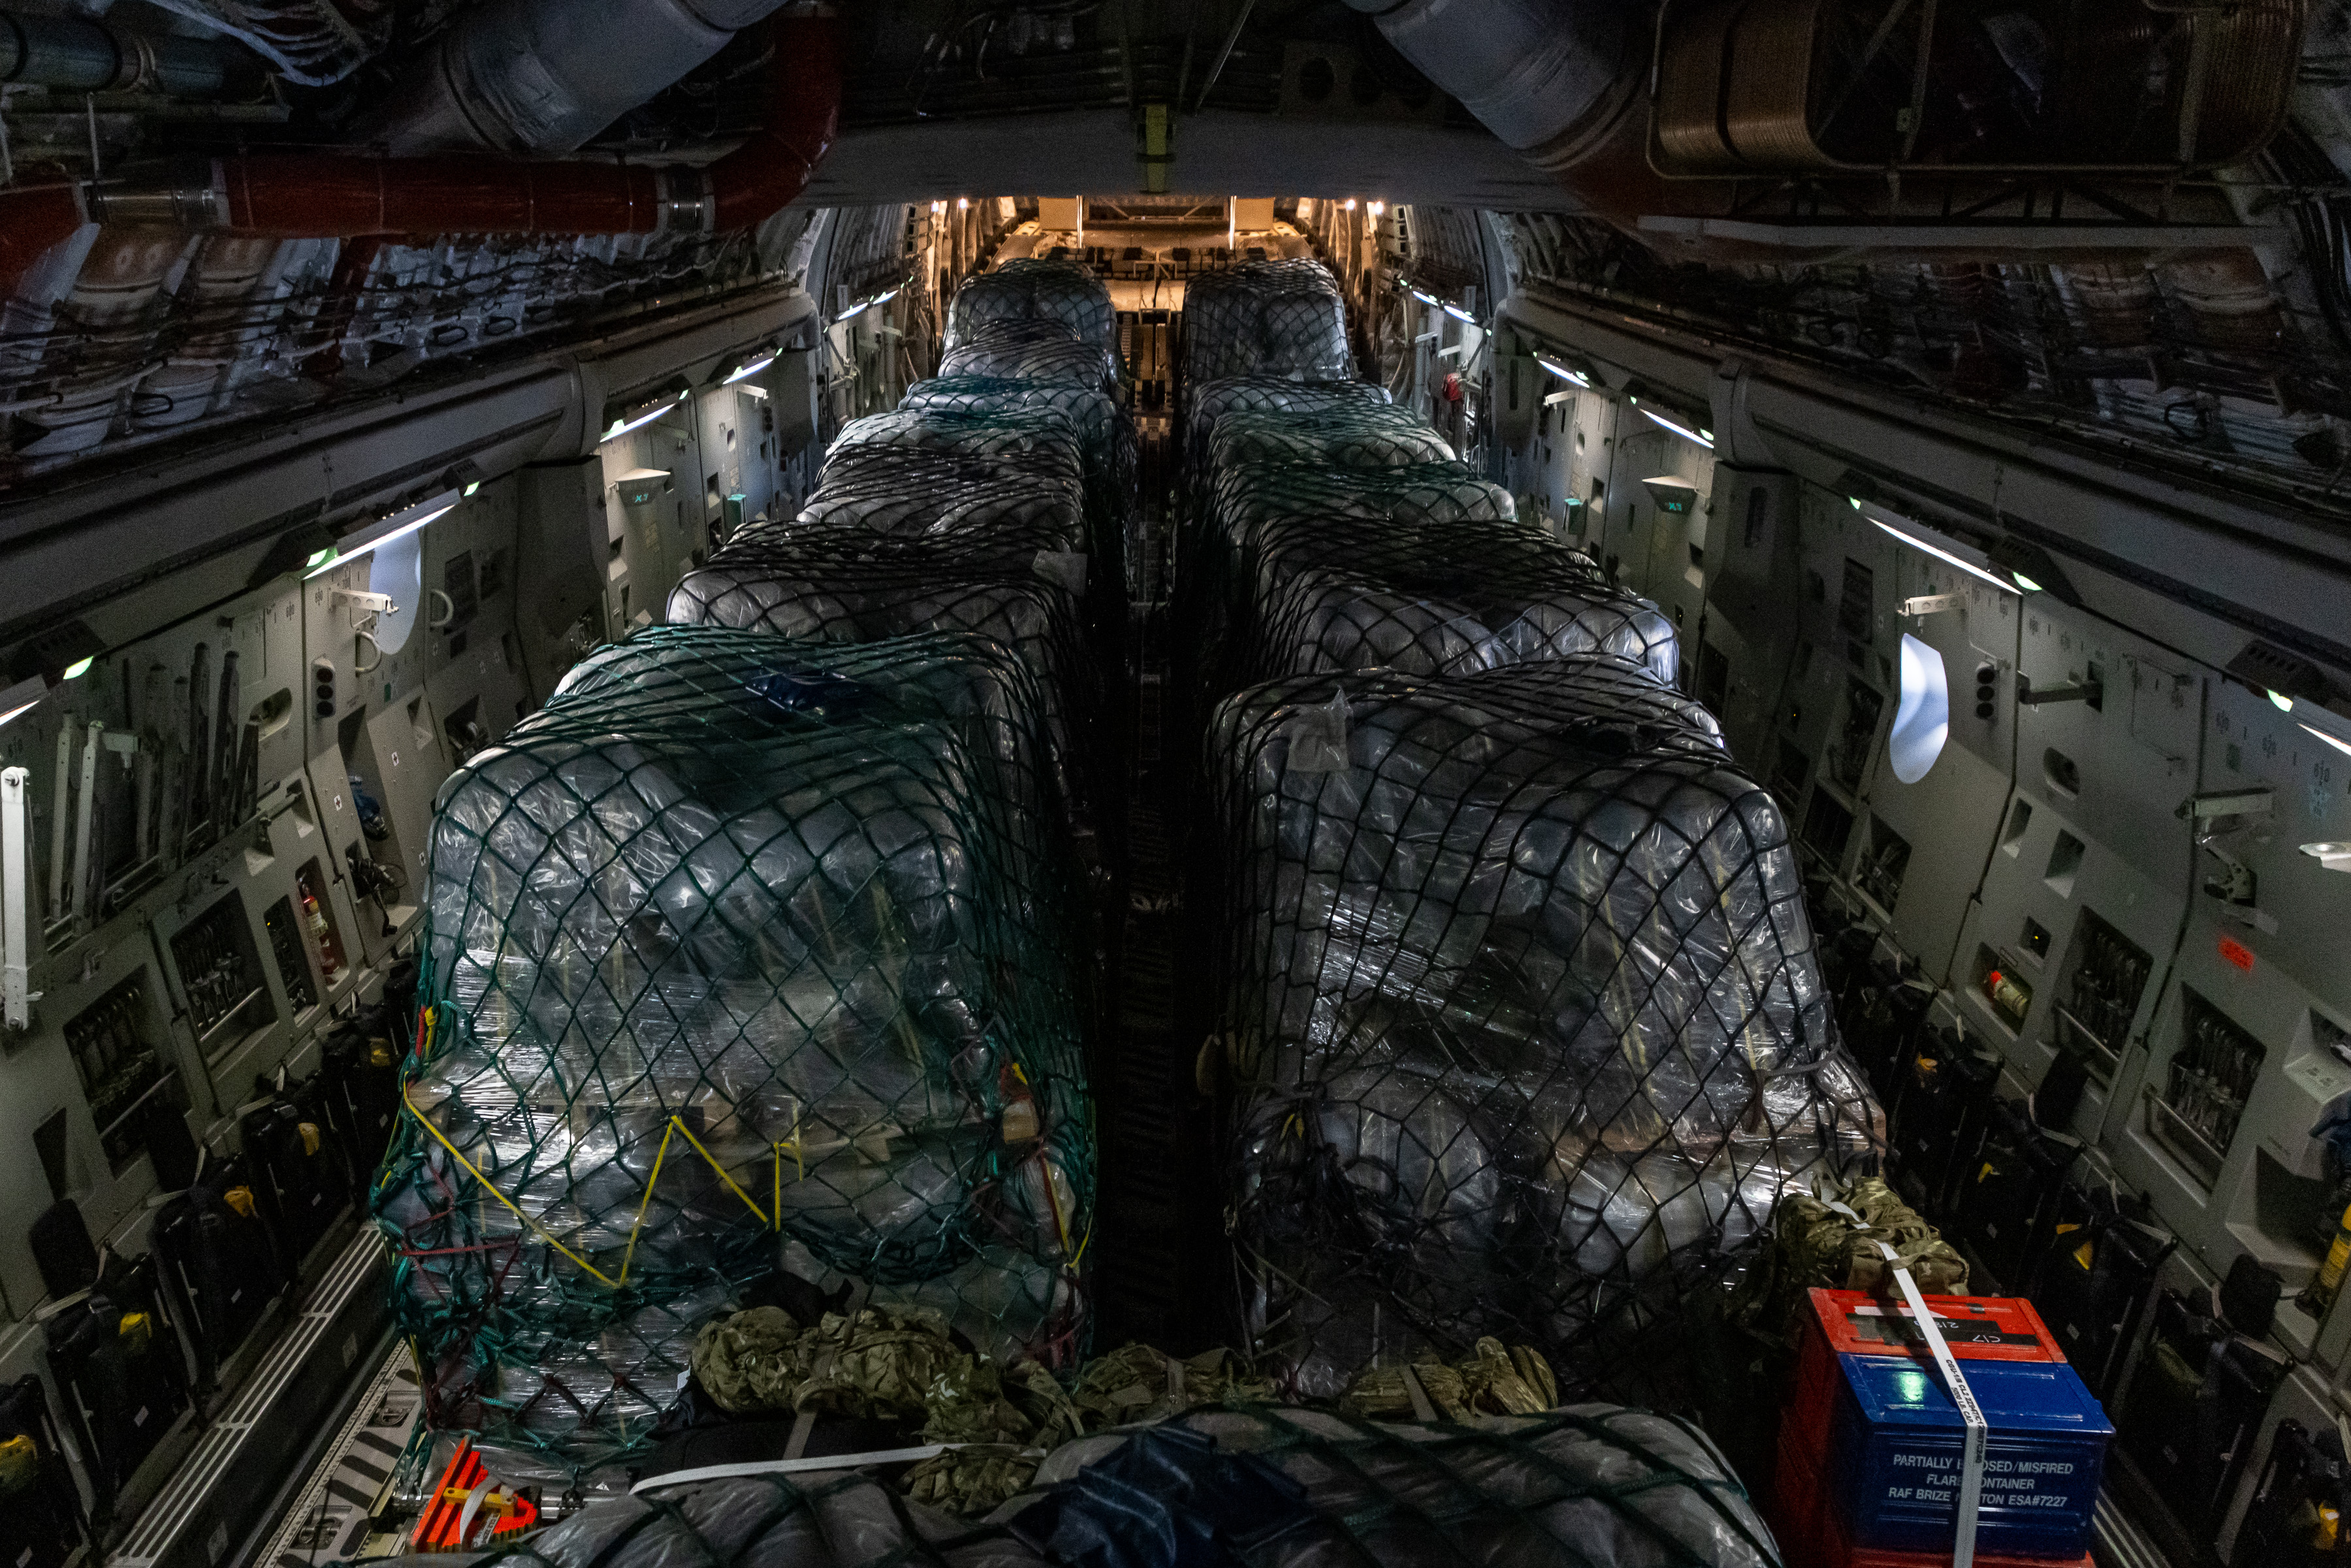 View of the C-17 full of supplies